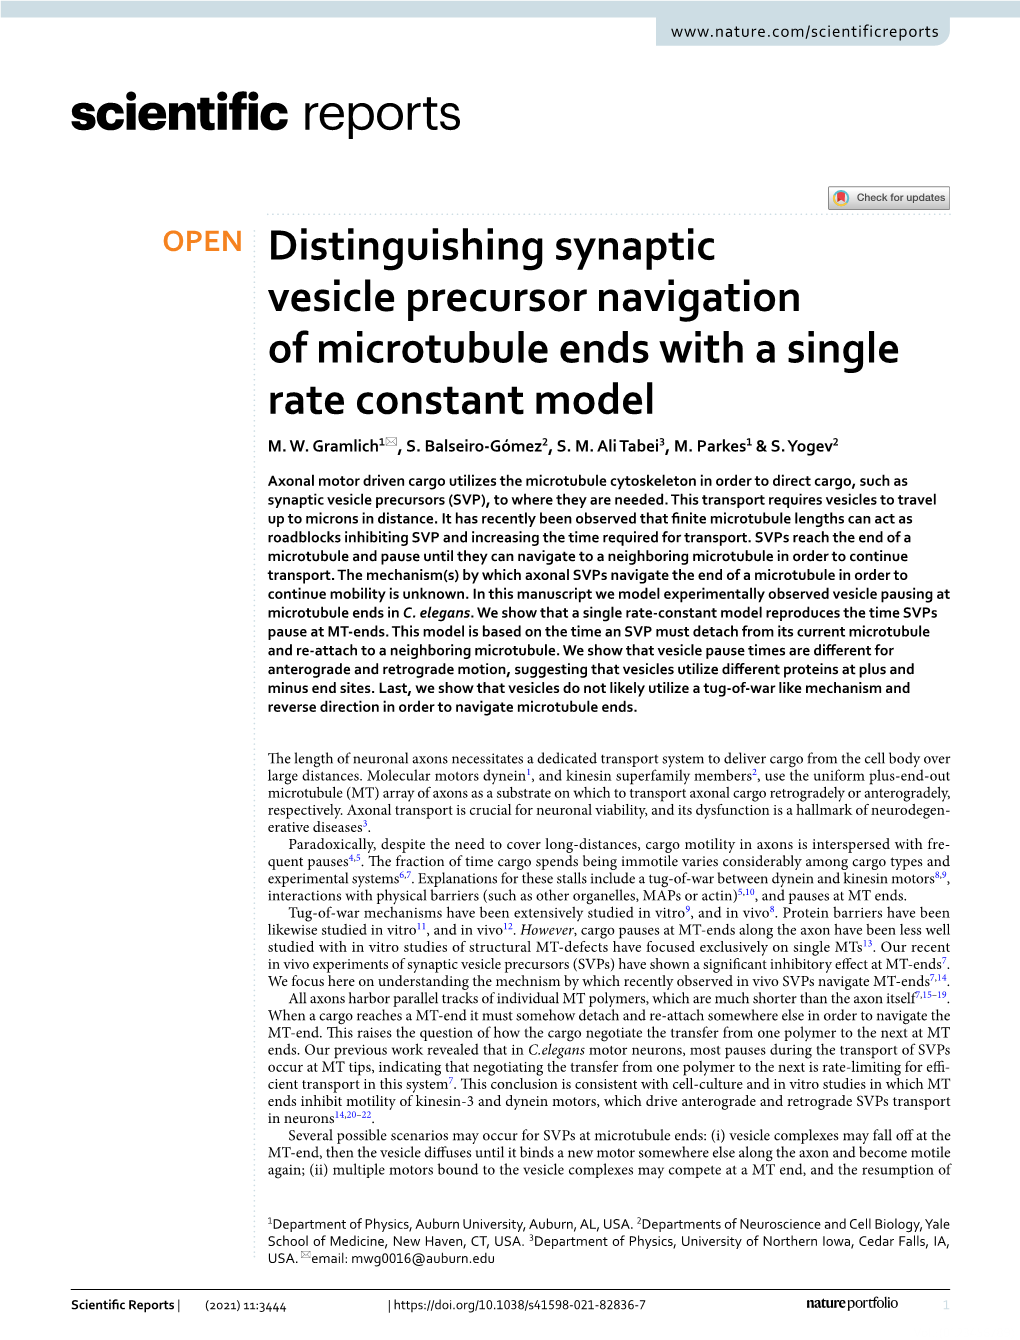 Distinguishing Synaptic Vesicle Precursor Navigation of Microtubule Ends with a Single Rate Constant Model M